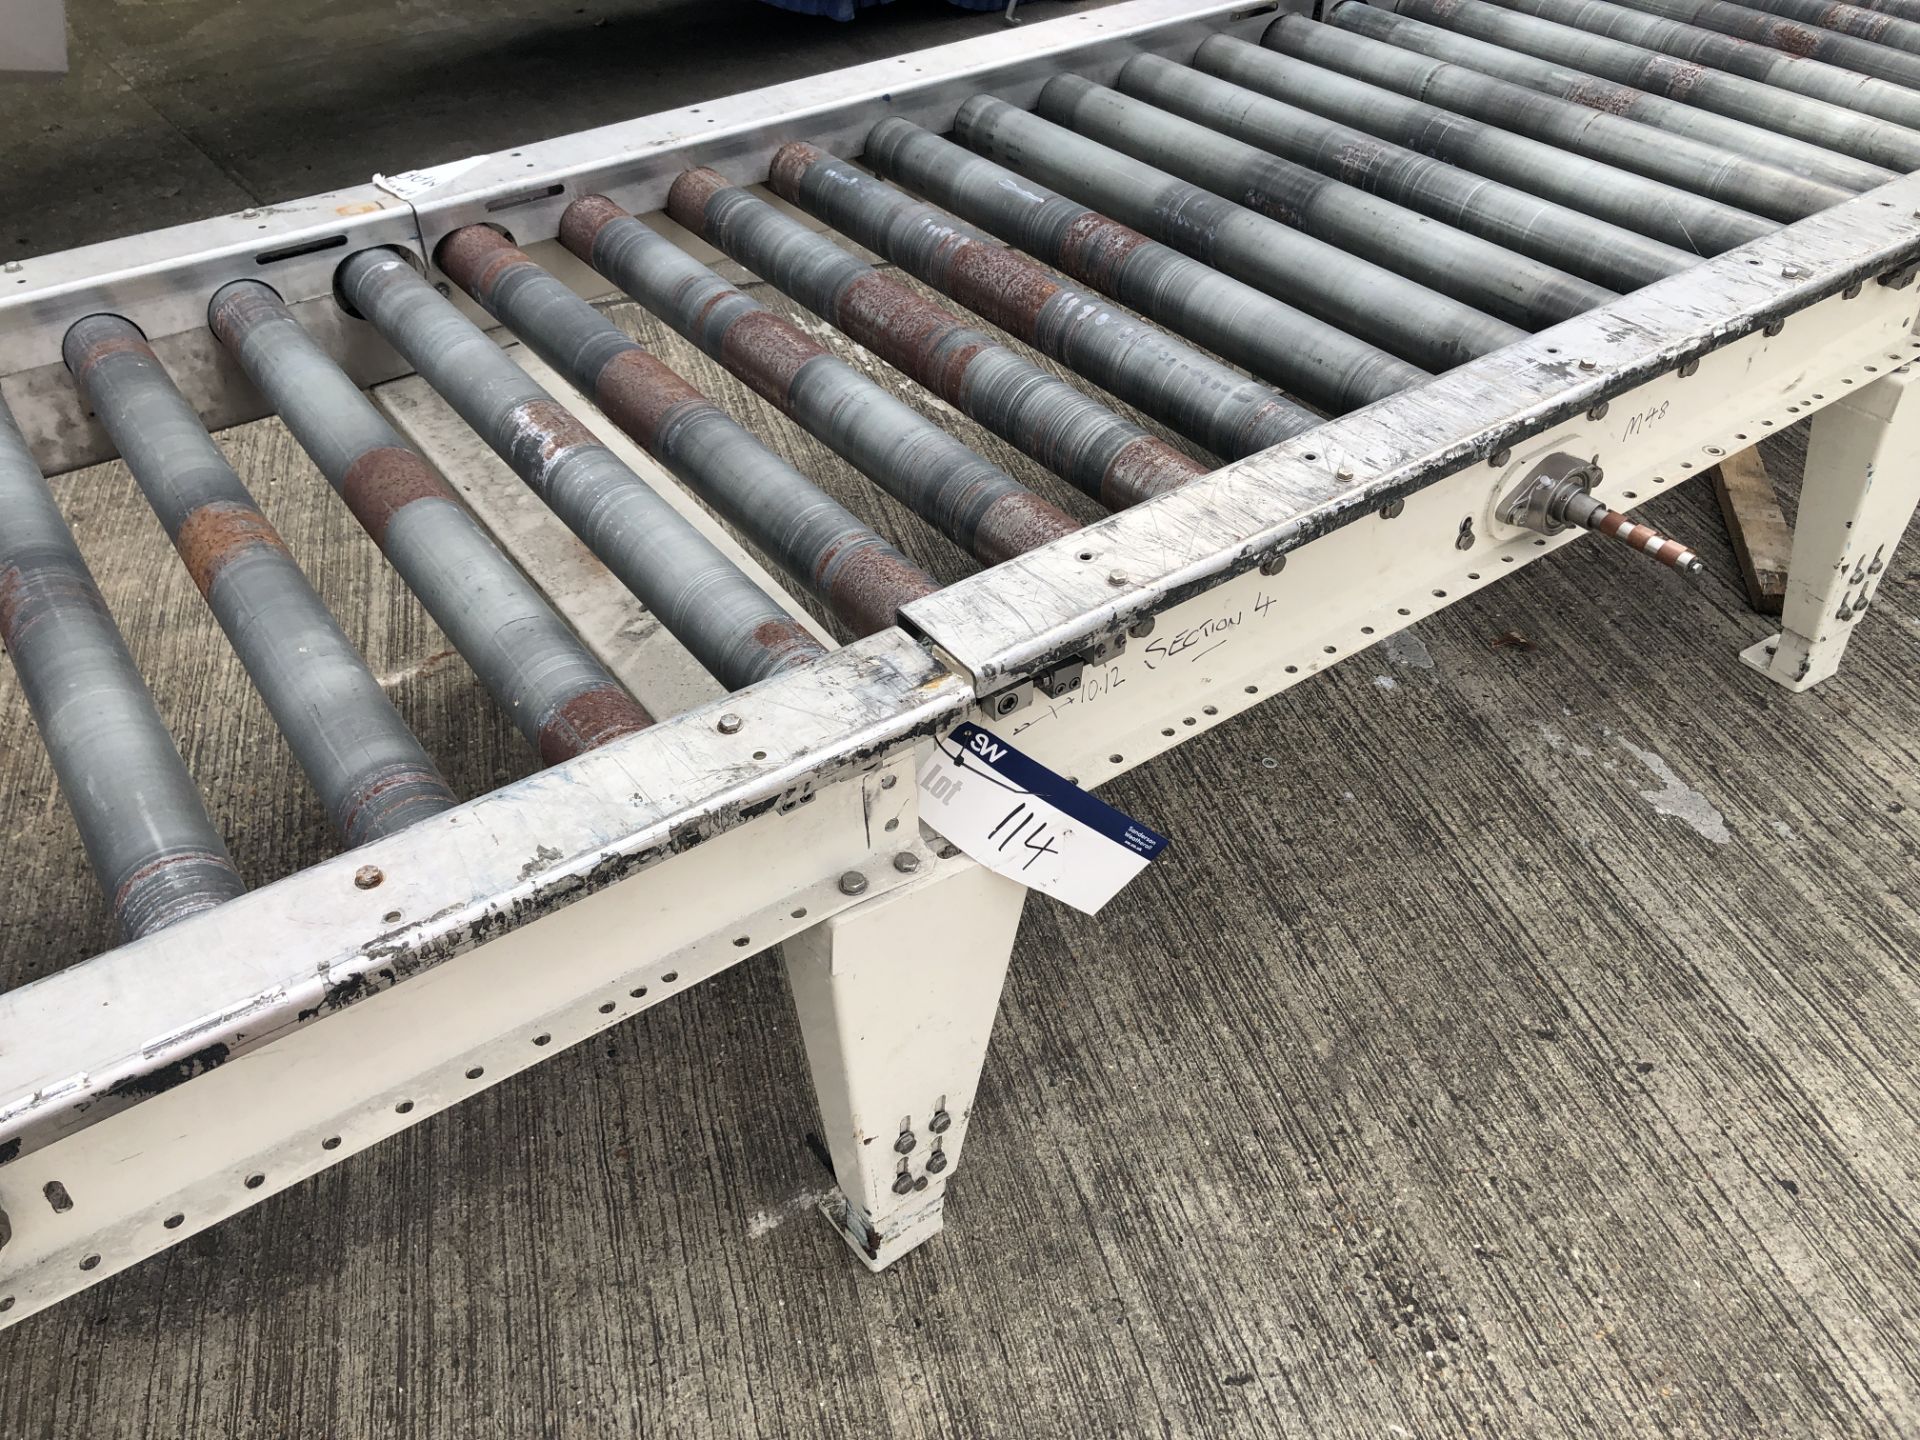 Six Section Pallet Conveyor System - Image 2 of 3